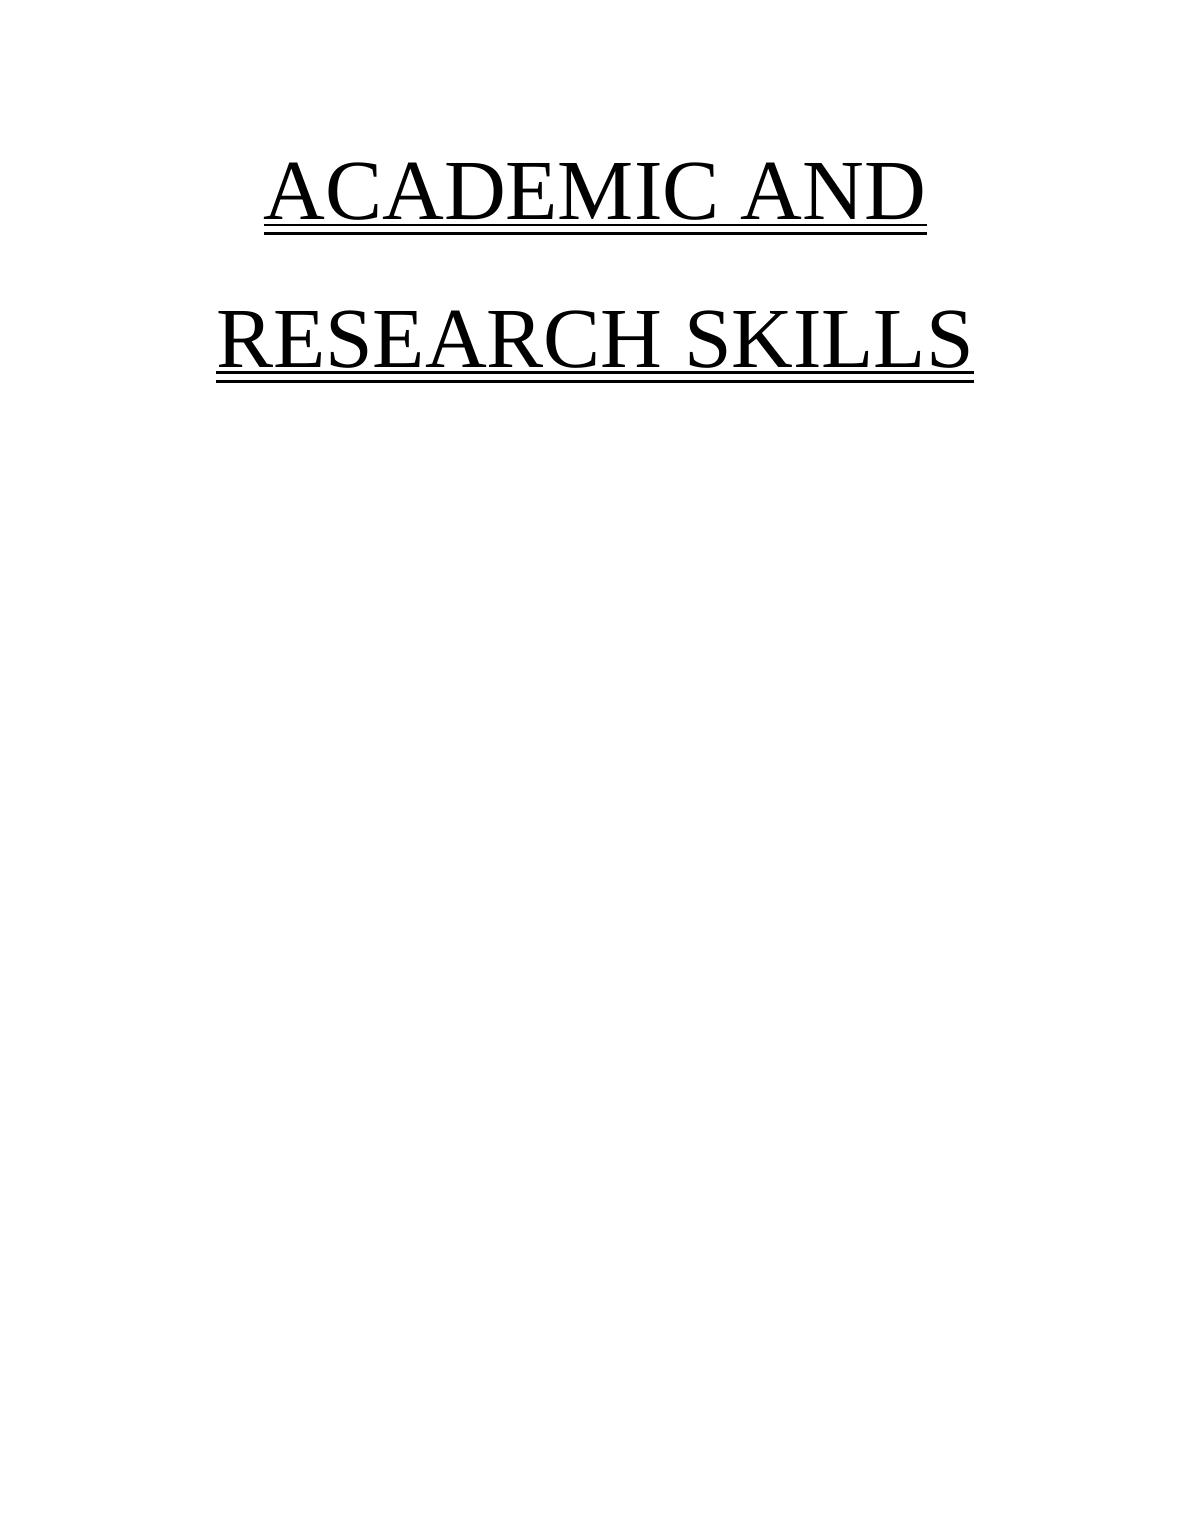 Academic and Research Skills (Doc)_1